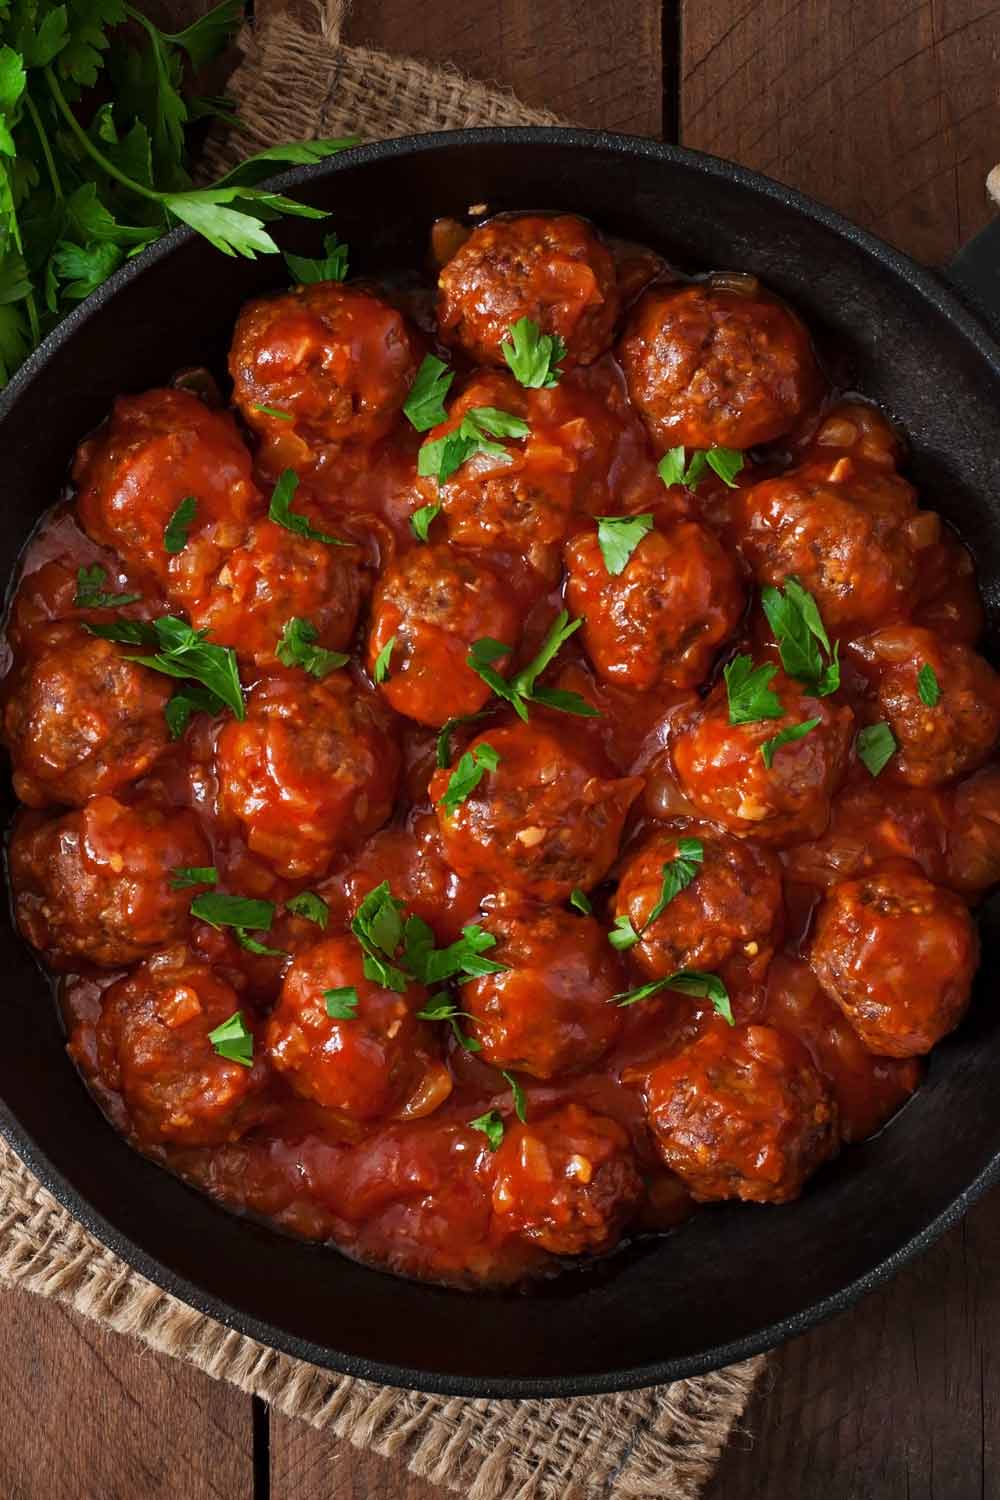 Cocktail Sweet and Spicy Meatballs